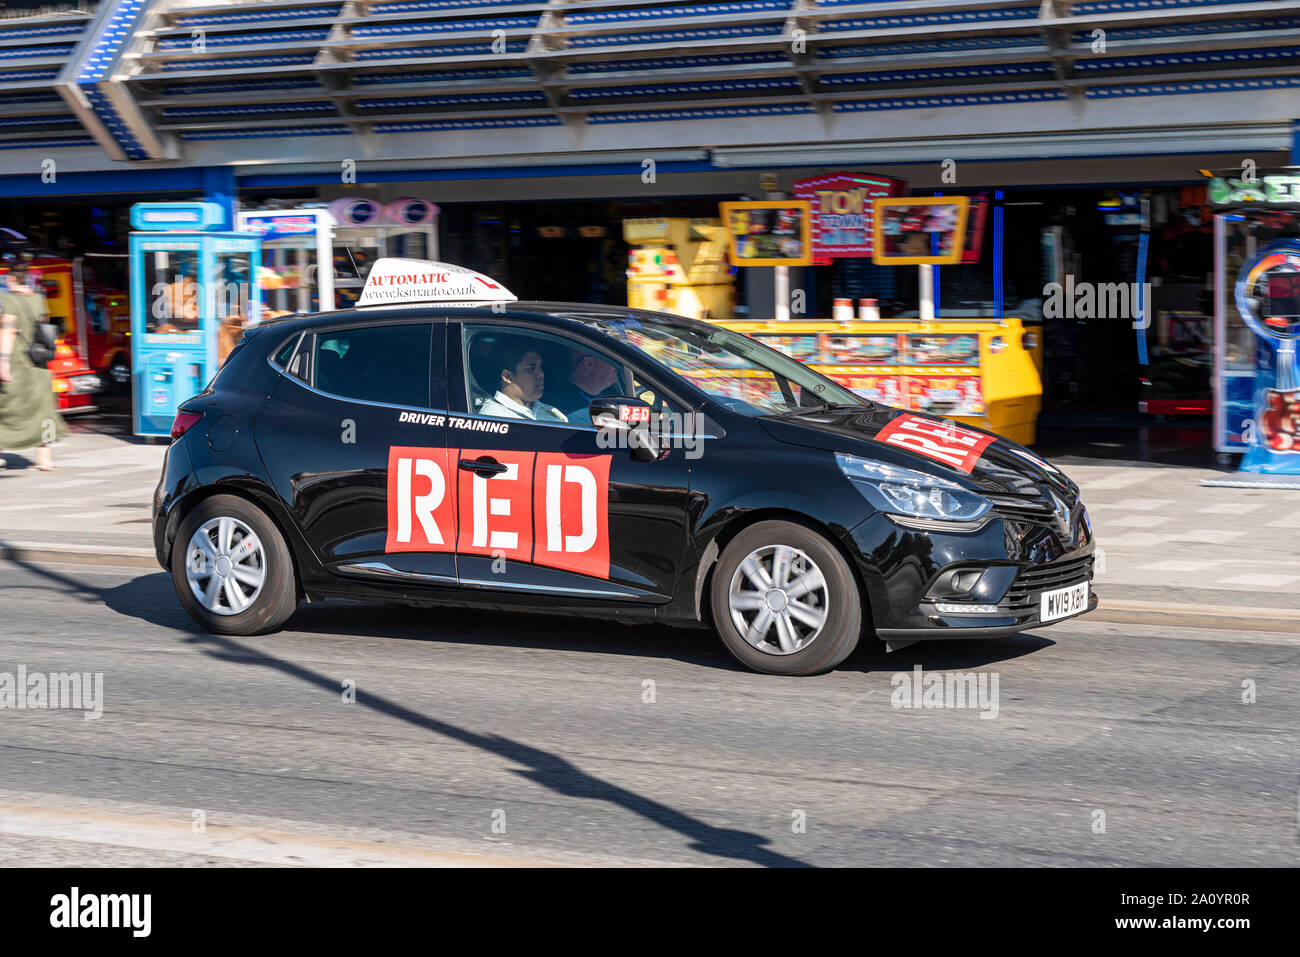 RED Driving School driving tuition car being driven by a learner driver along Marine Parade, Southend on Sea, Essex, UK passing amusement arcades Stock Photo